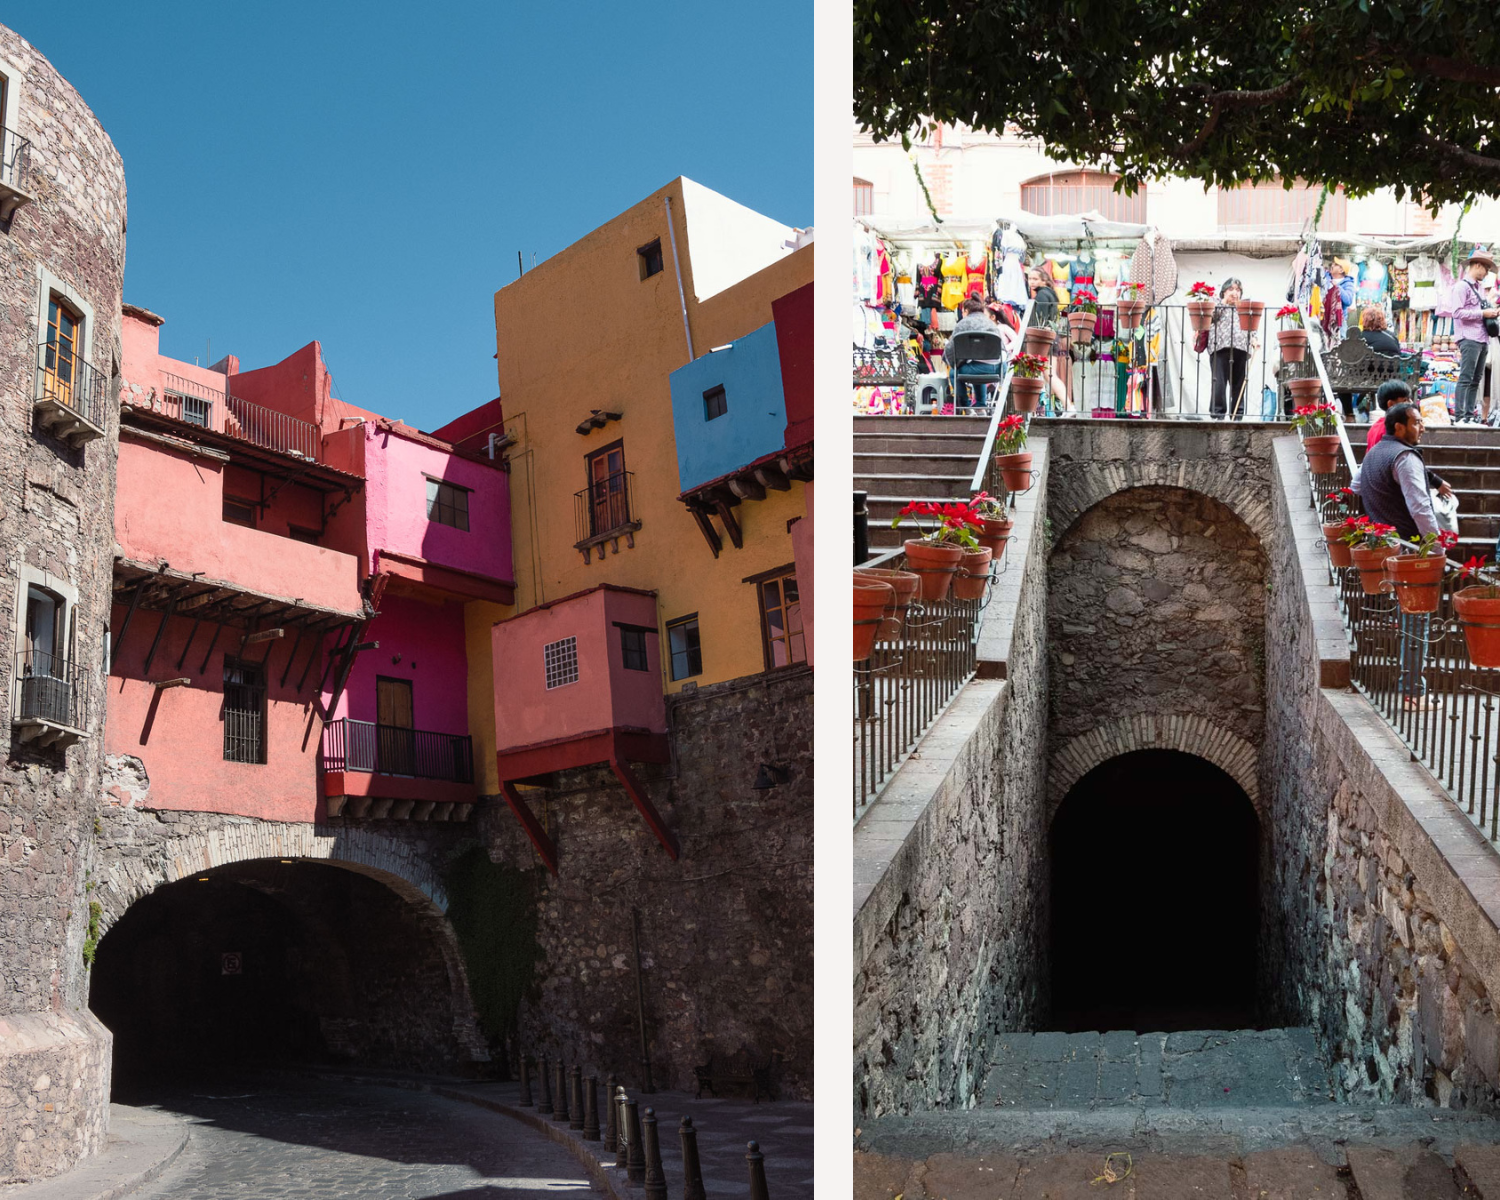 The Tunnels and subterranean streets of Guanajuato